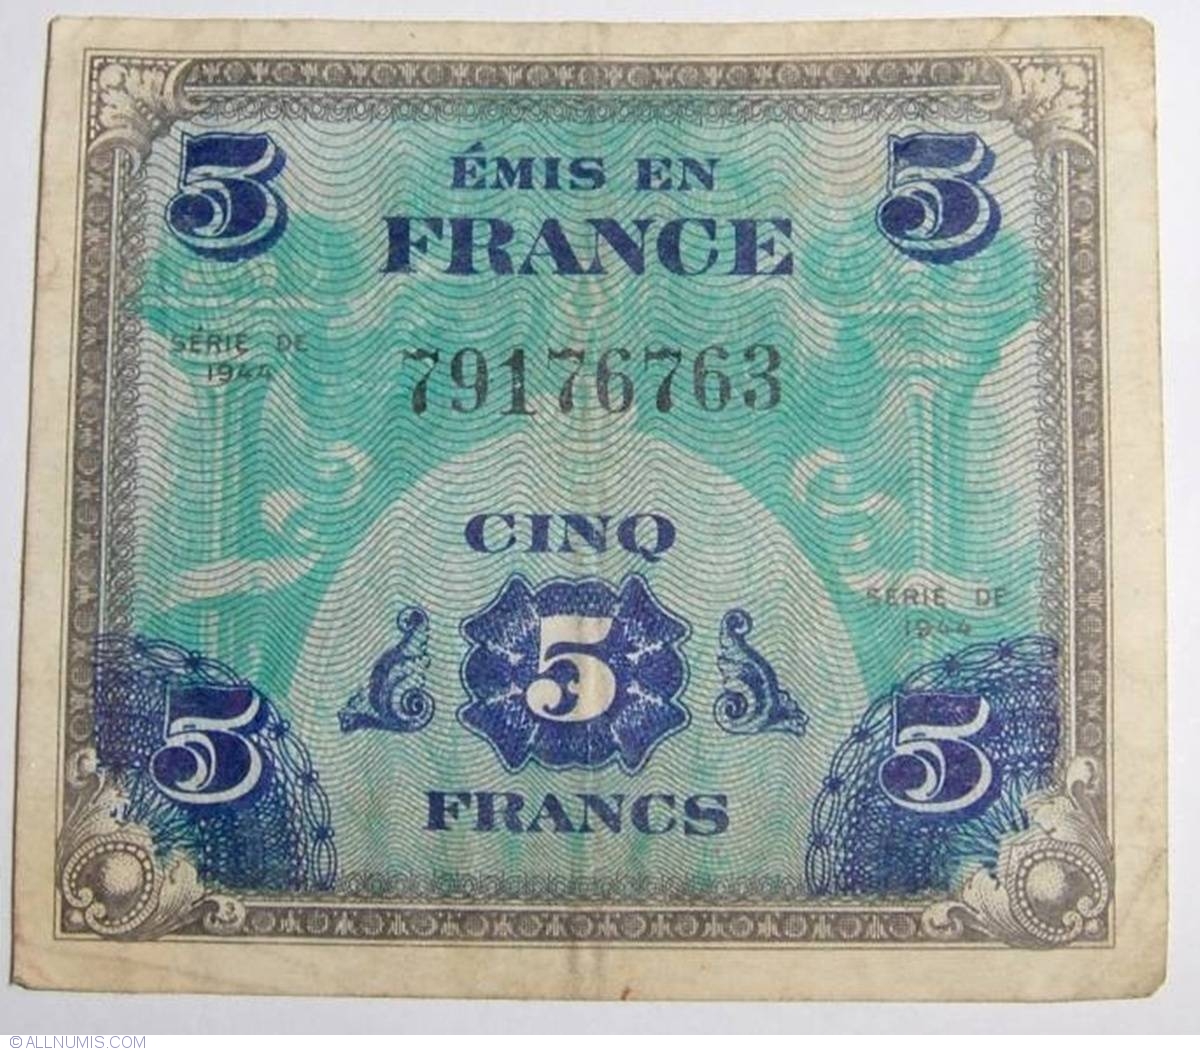 5 Francs 1944, 1944 First Issue (Allied Military Currency) - France - Banknote - 4863